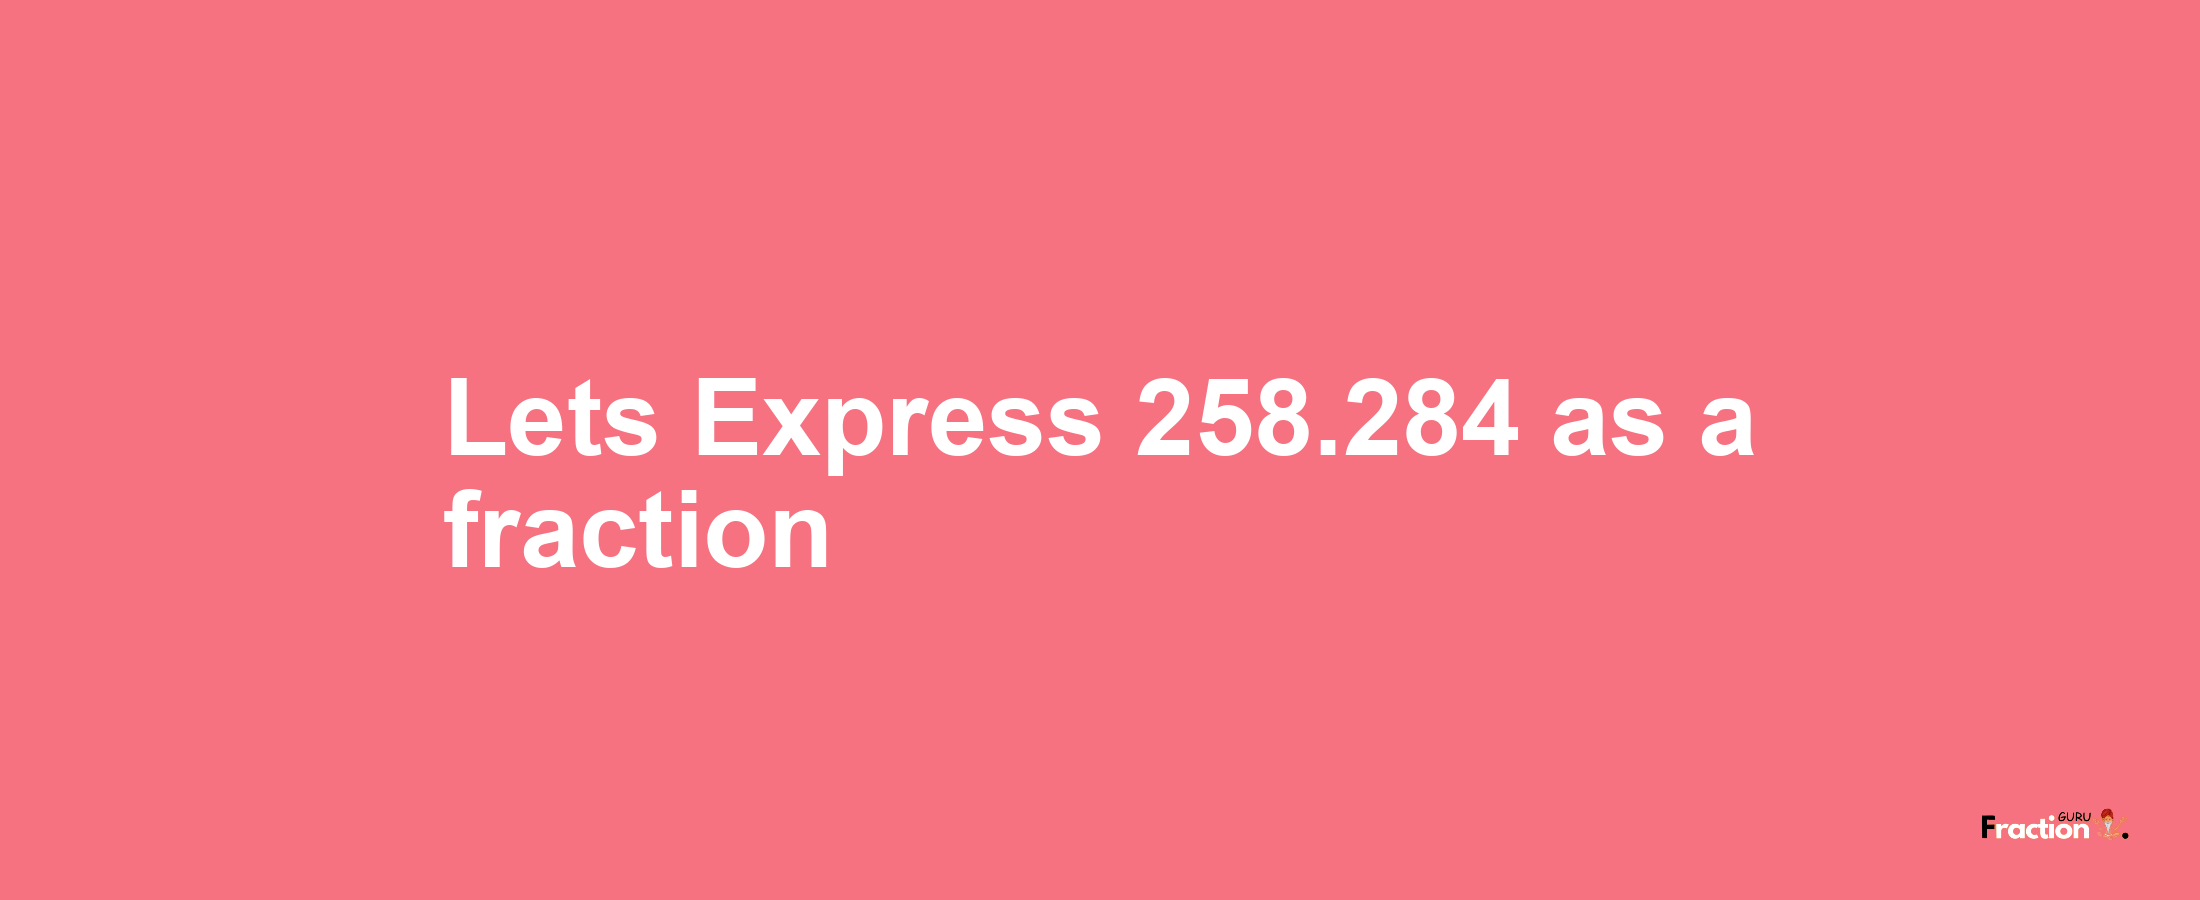 Lets Express 258.284 as afraction